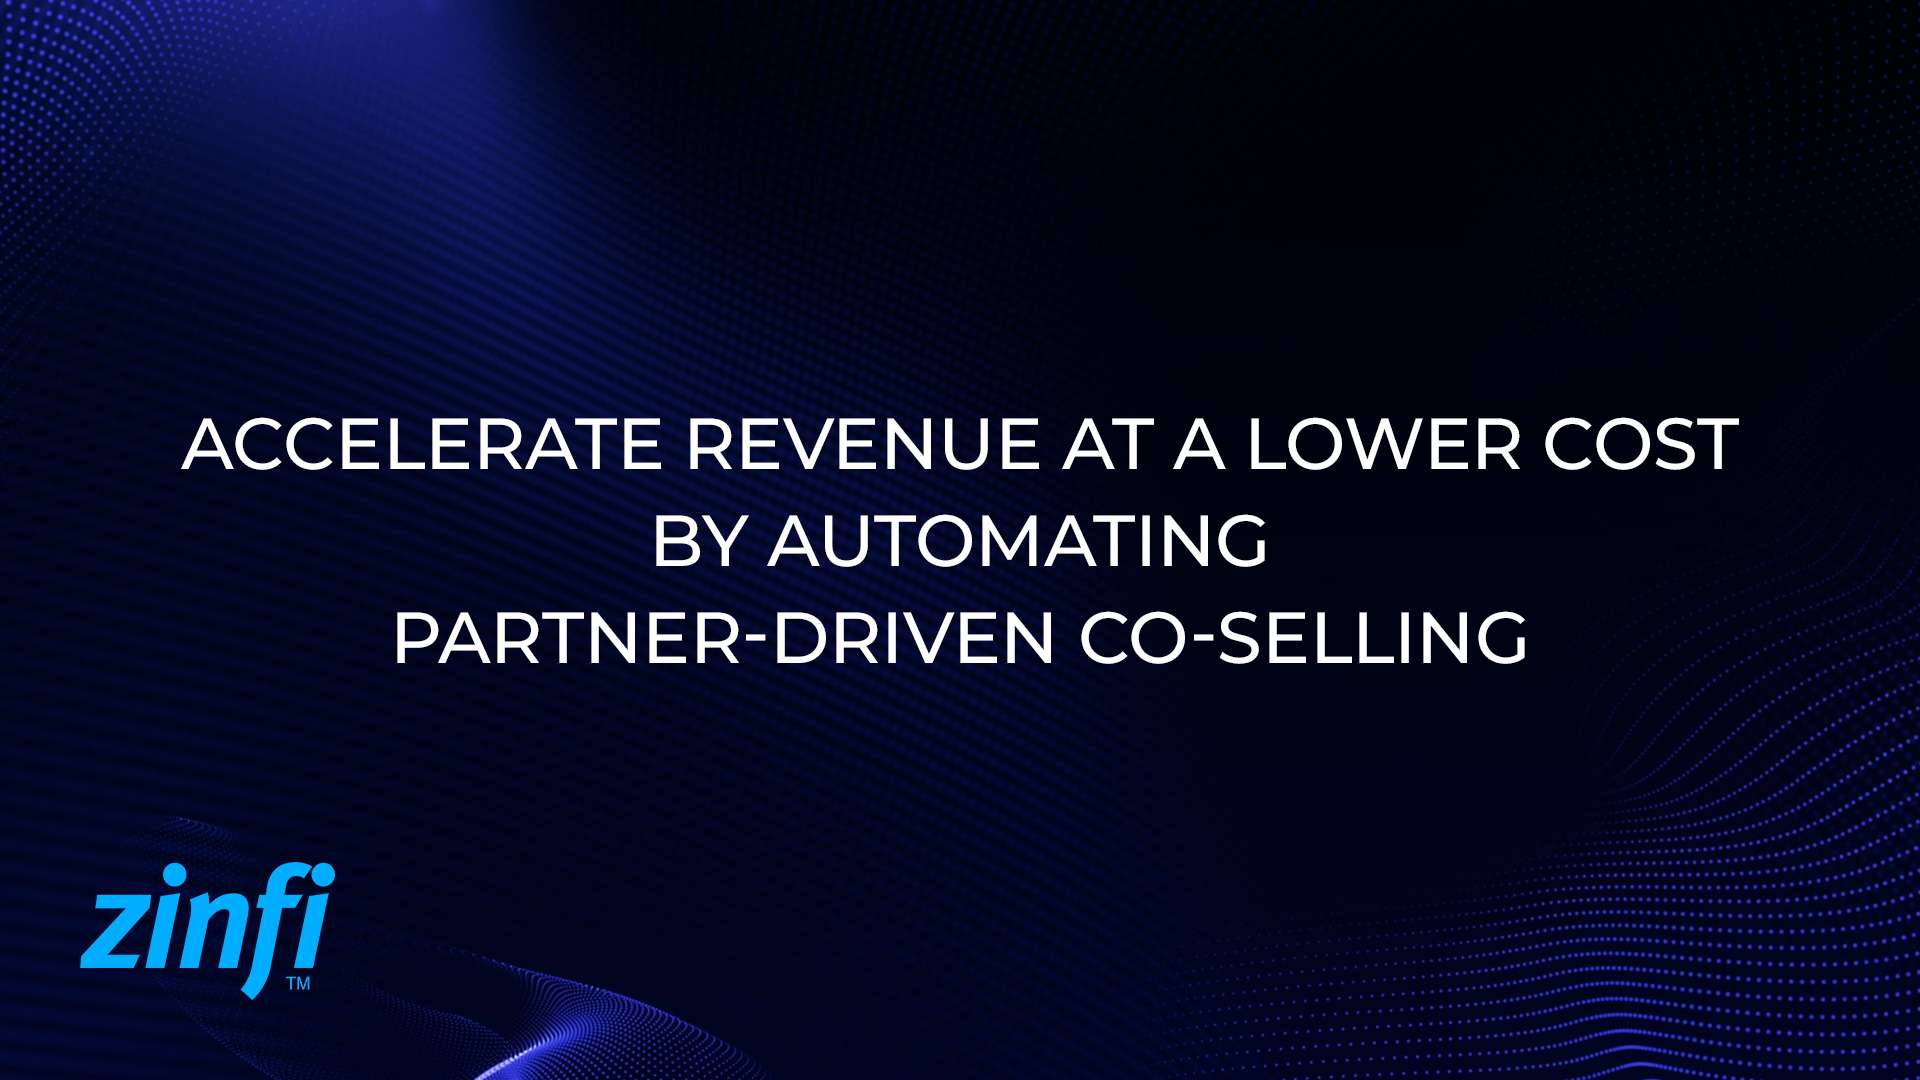 Automating Partner-Driven Co-Selling